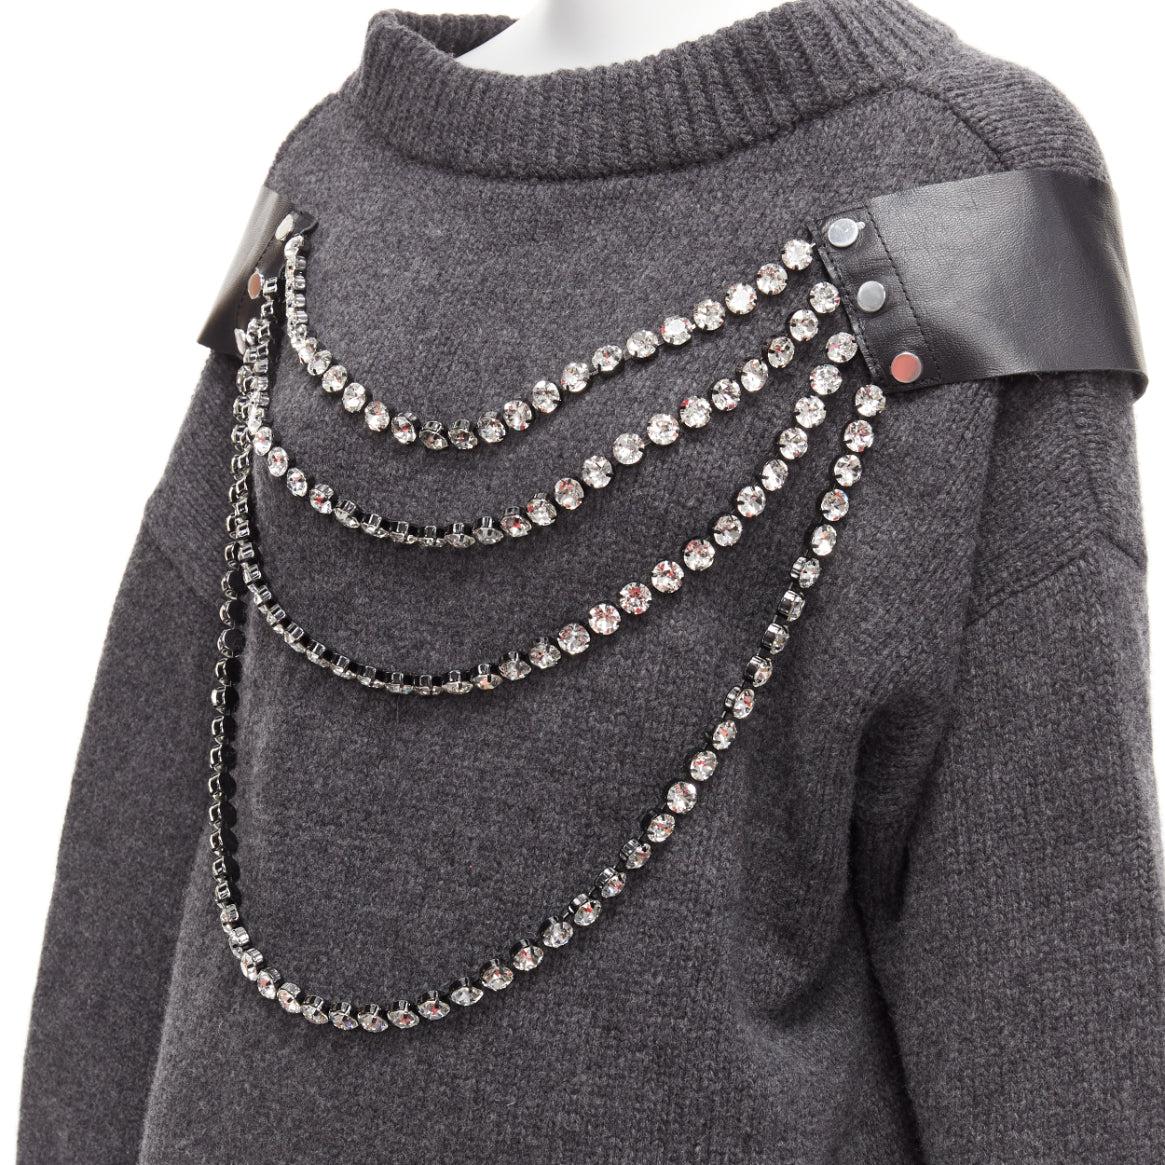 CHRISTOPHER KANE grey wool rhinestone chain harness oversized sweater dress XS
Reference: AAWC/A00639
Brand: Christopher Kane
Material: 100% Wool
Color: Grey, Black
Pattern: Solid
Extra Details: Leather and jewel embellished chains attached at snap